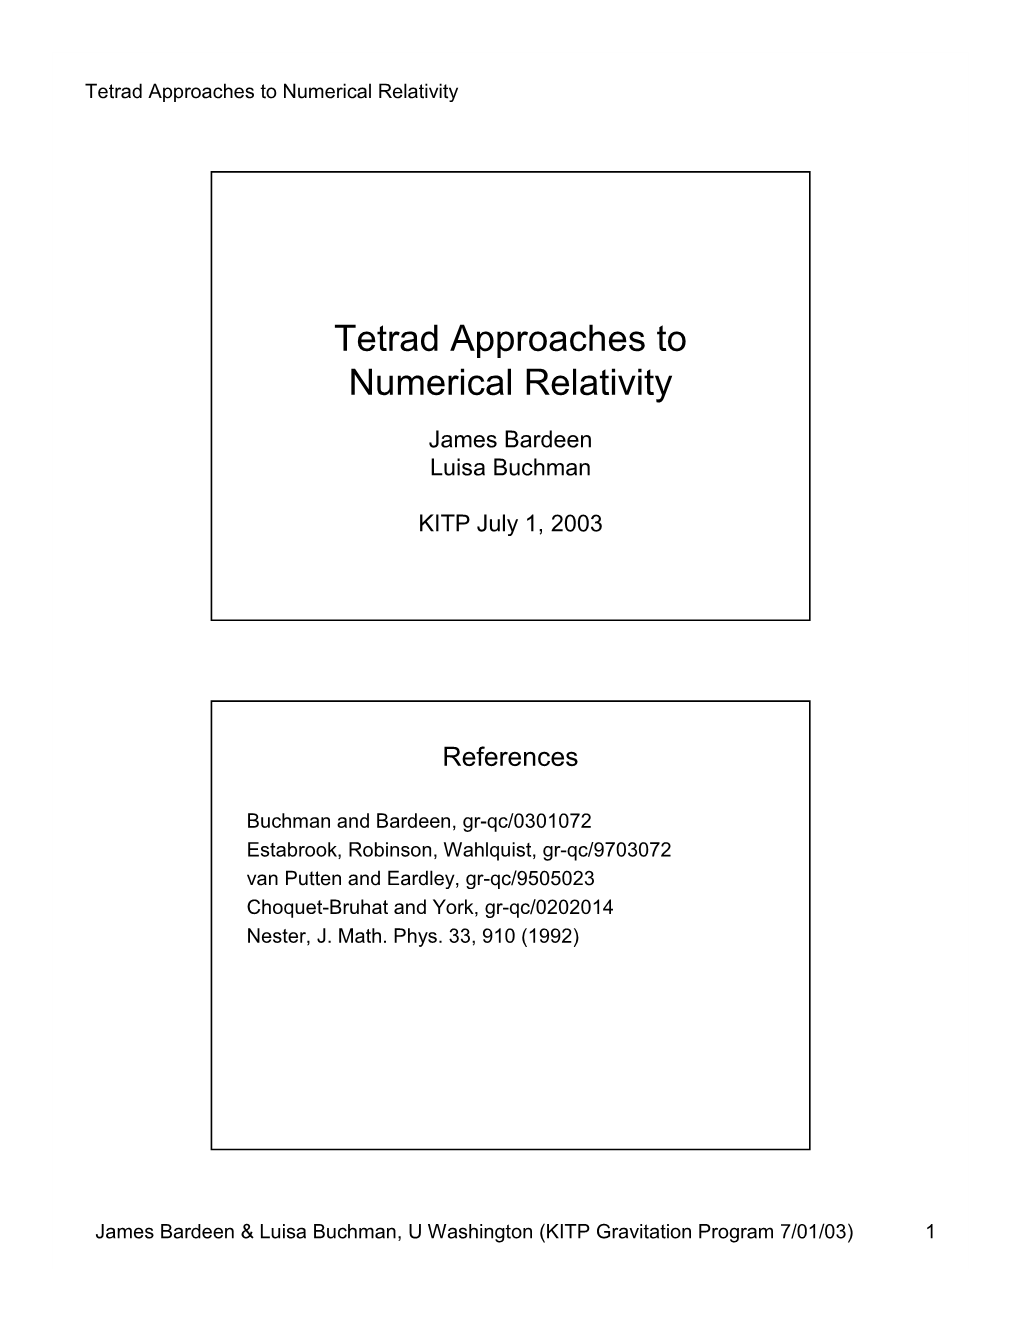 Tetrad Approaches to Numerical Relativity